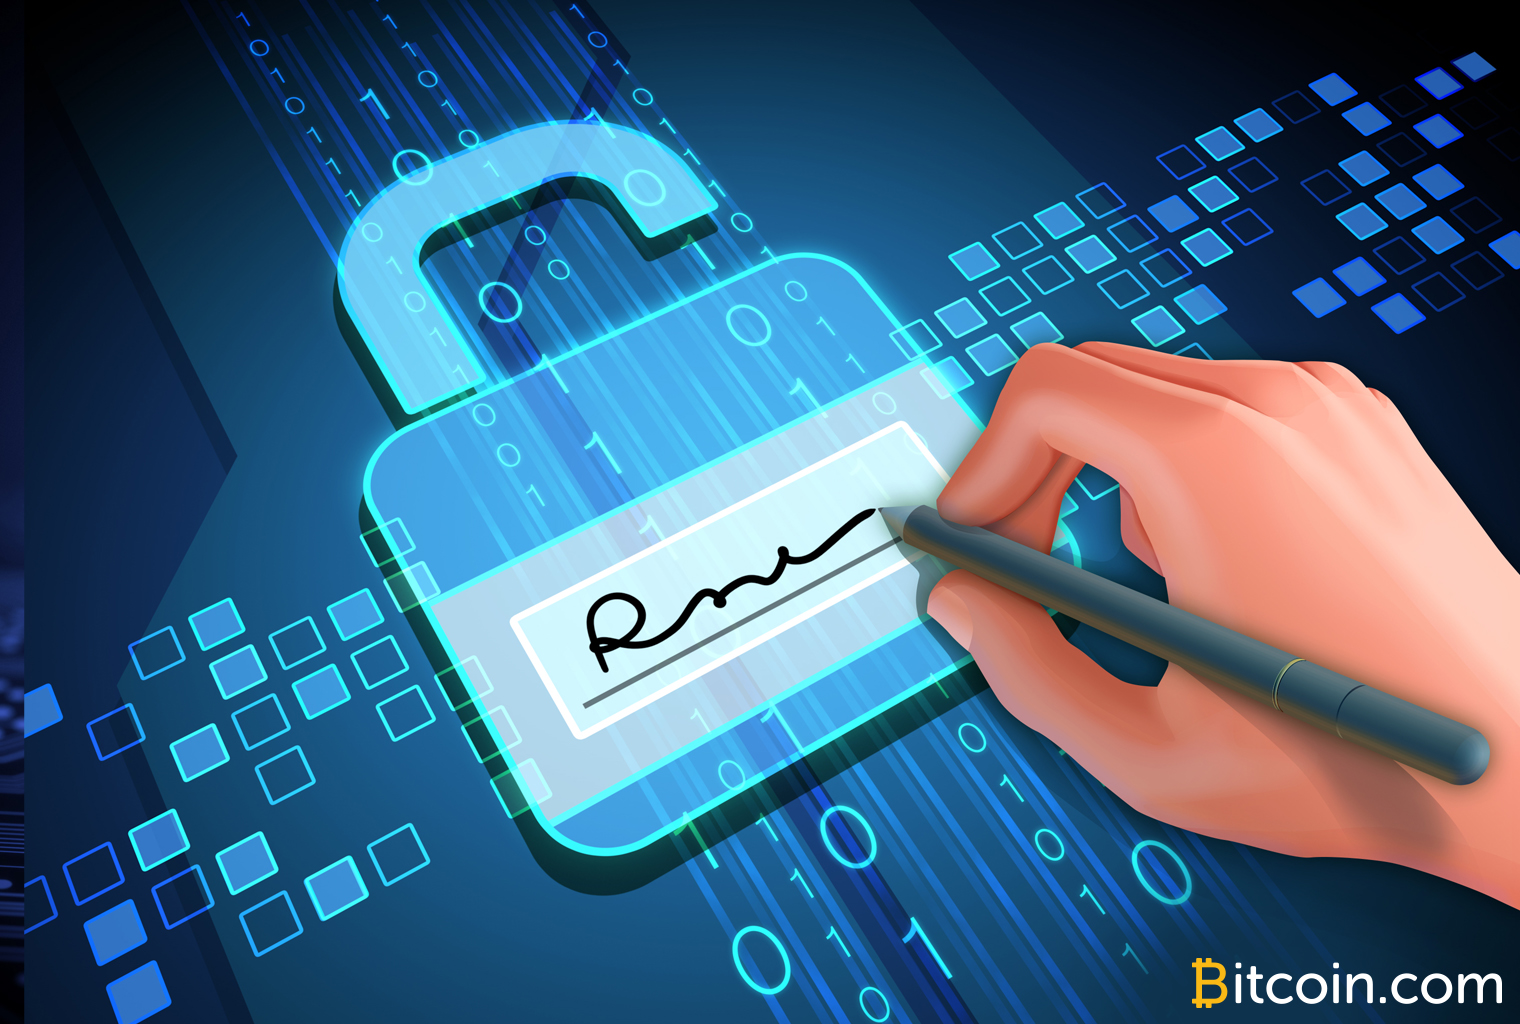 How to Prove Ownership With a Bitcoin Cash Address and Digital Signature